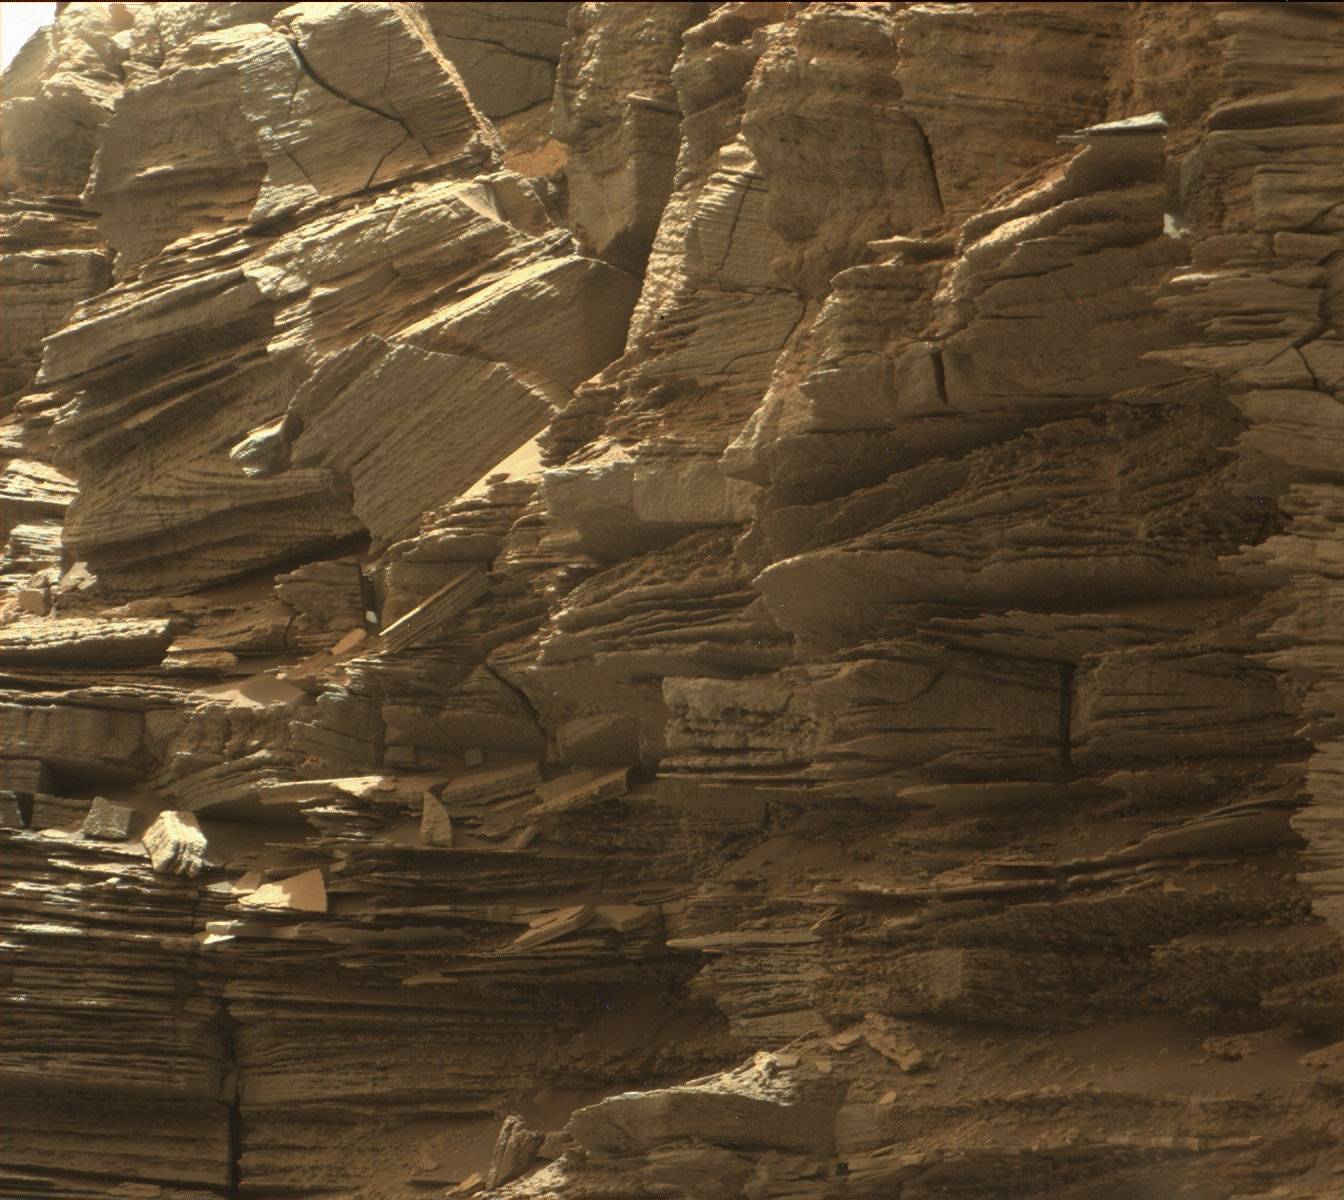 This closeup view from NASA's Curiosity rover shows finely layered rocks, deposited by wind long ago as migrating sand dunes